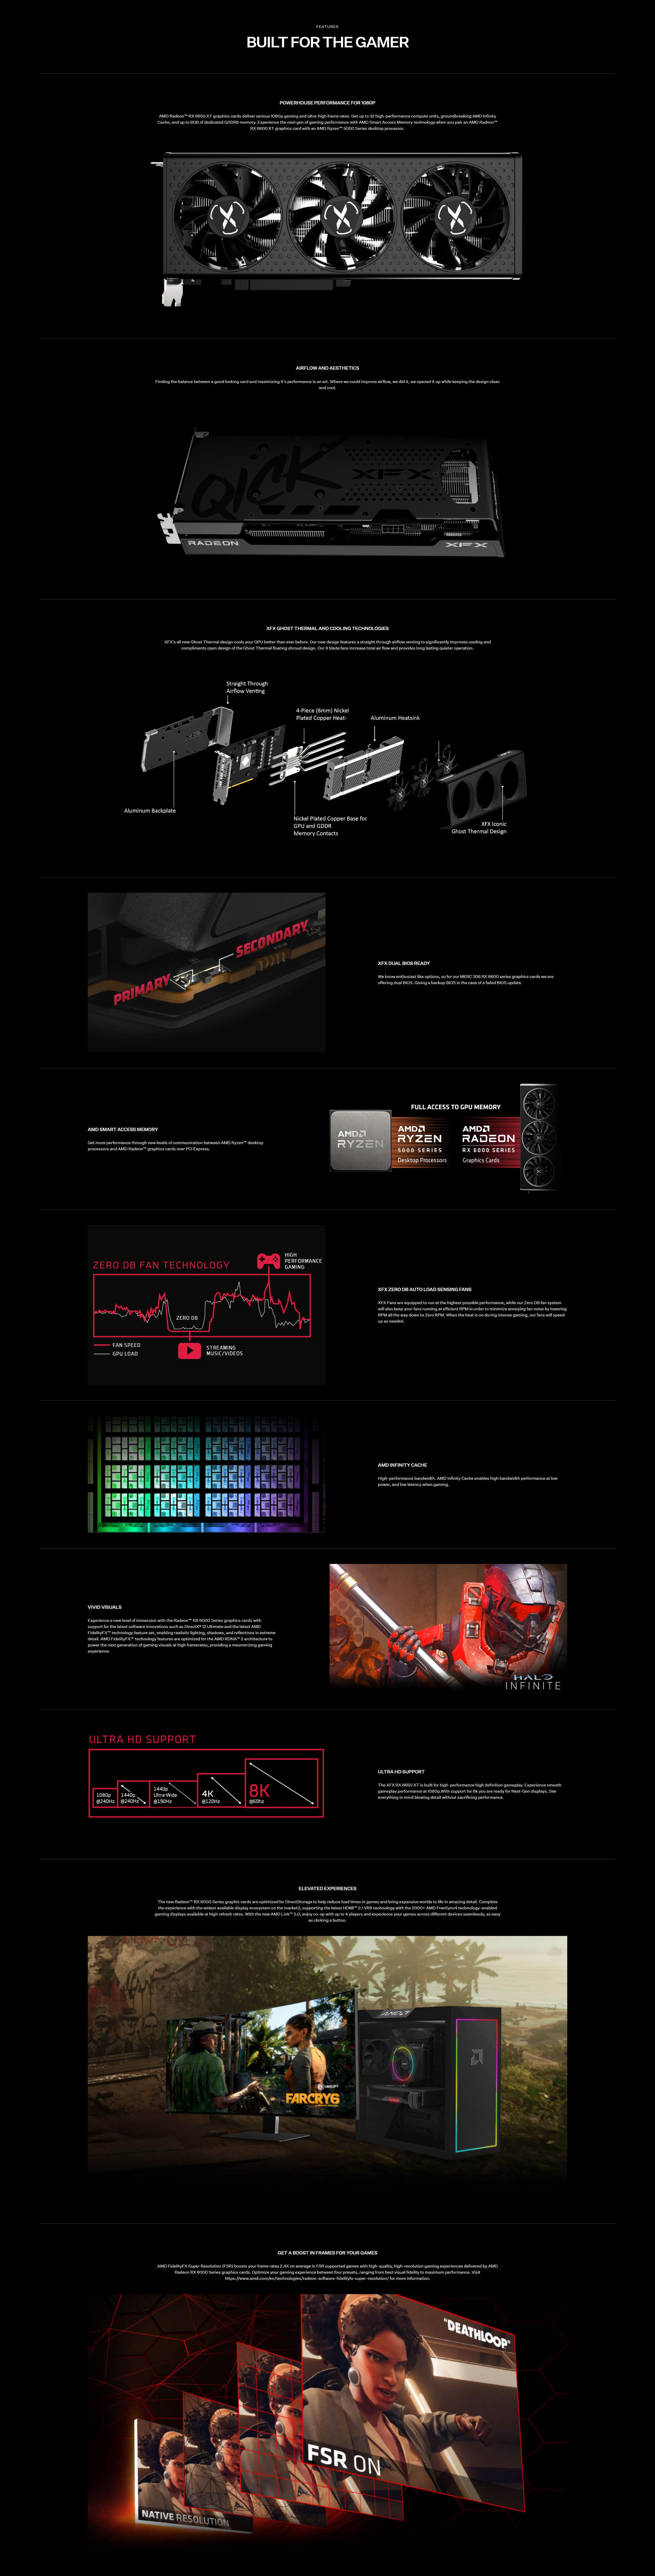 A large marketing image providing additional information about the product XFX Radeon RX 6650 XT Speedster QICK 308 Ultra 8GB GDDR6 - Additional alt info not provided